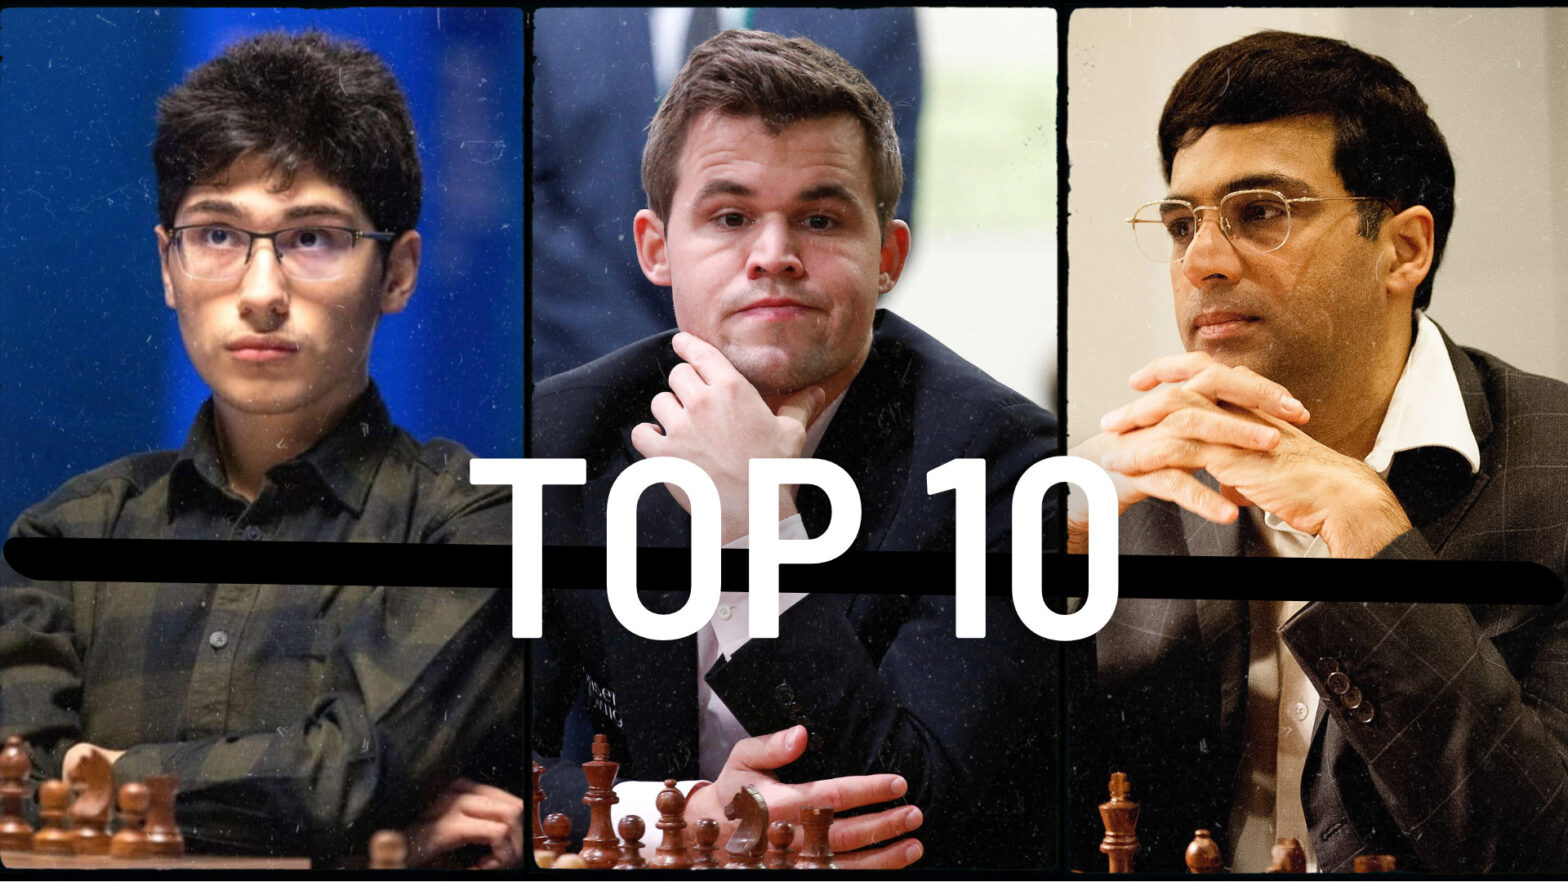 ▷ Best chess players in the world - #1 exquisite players in the